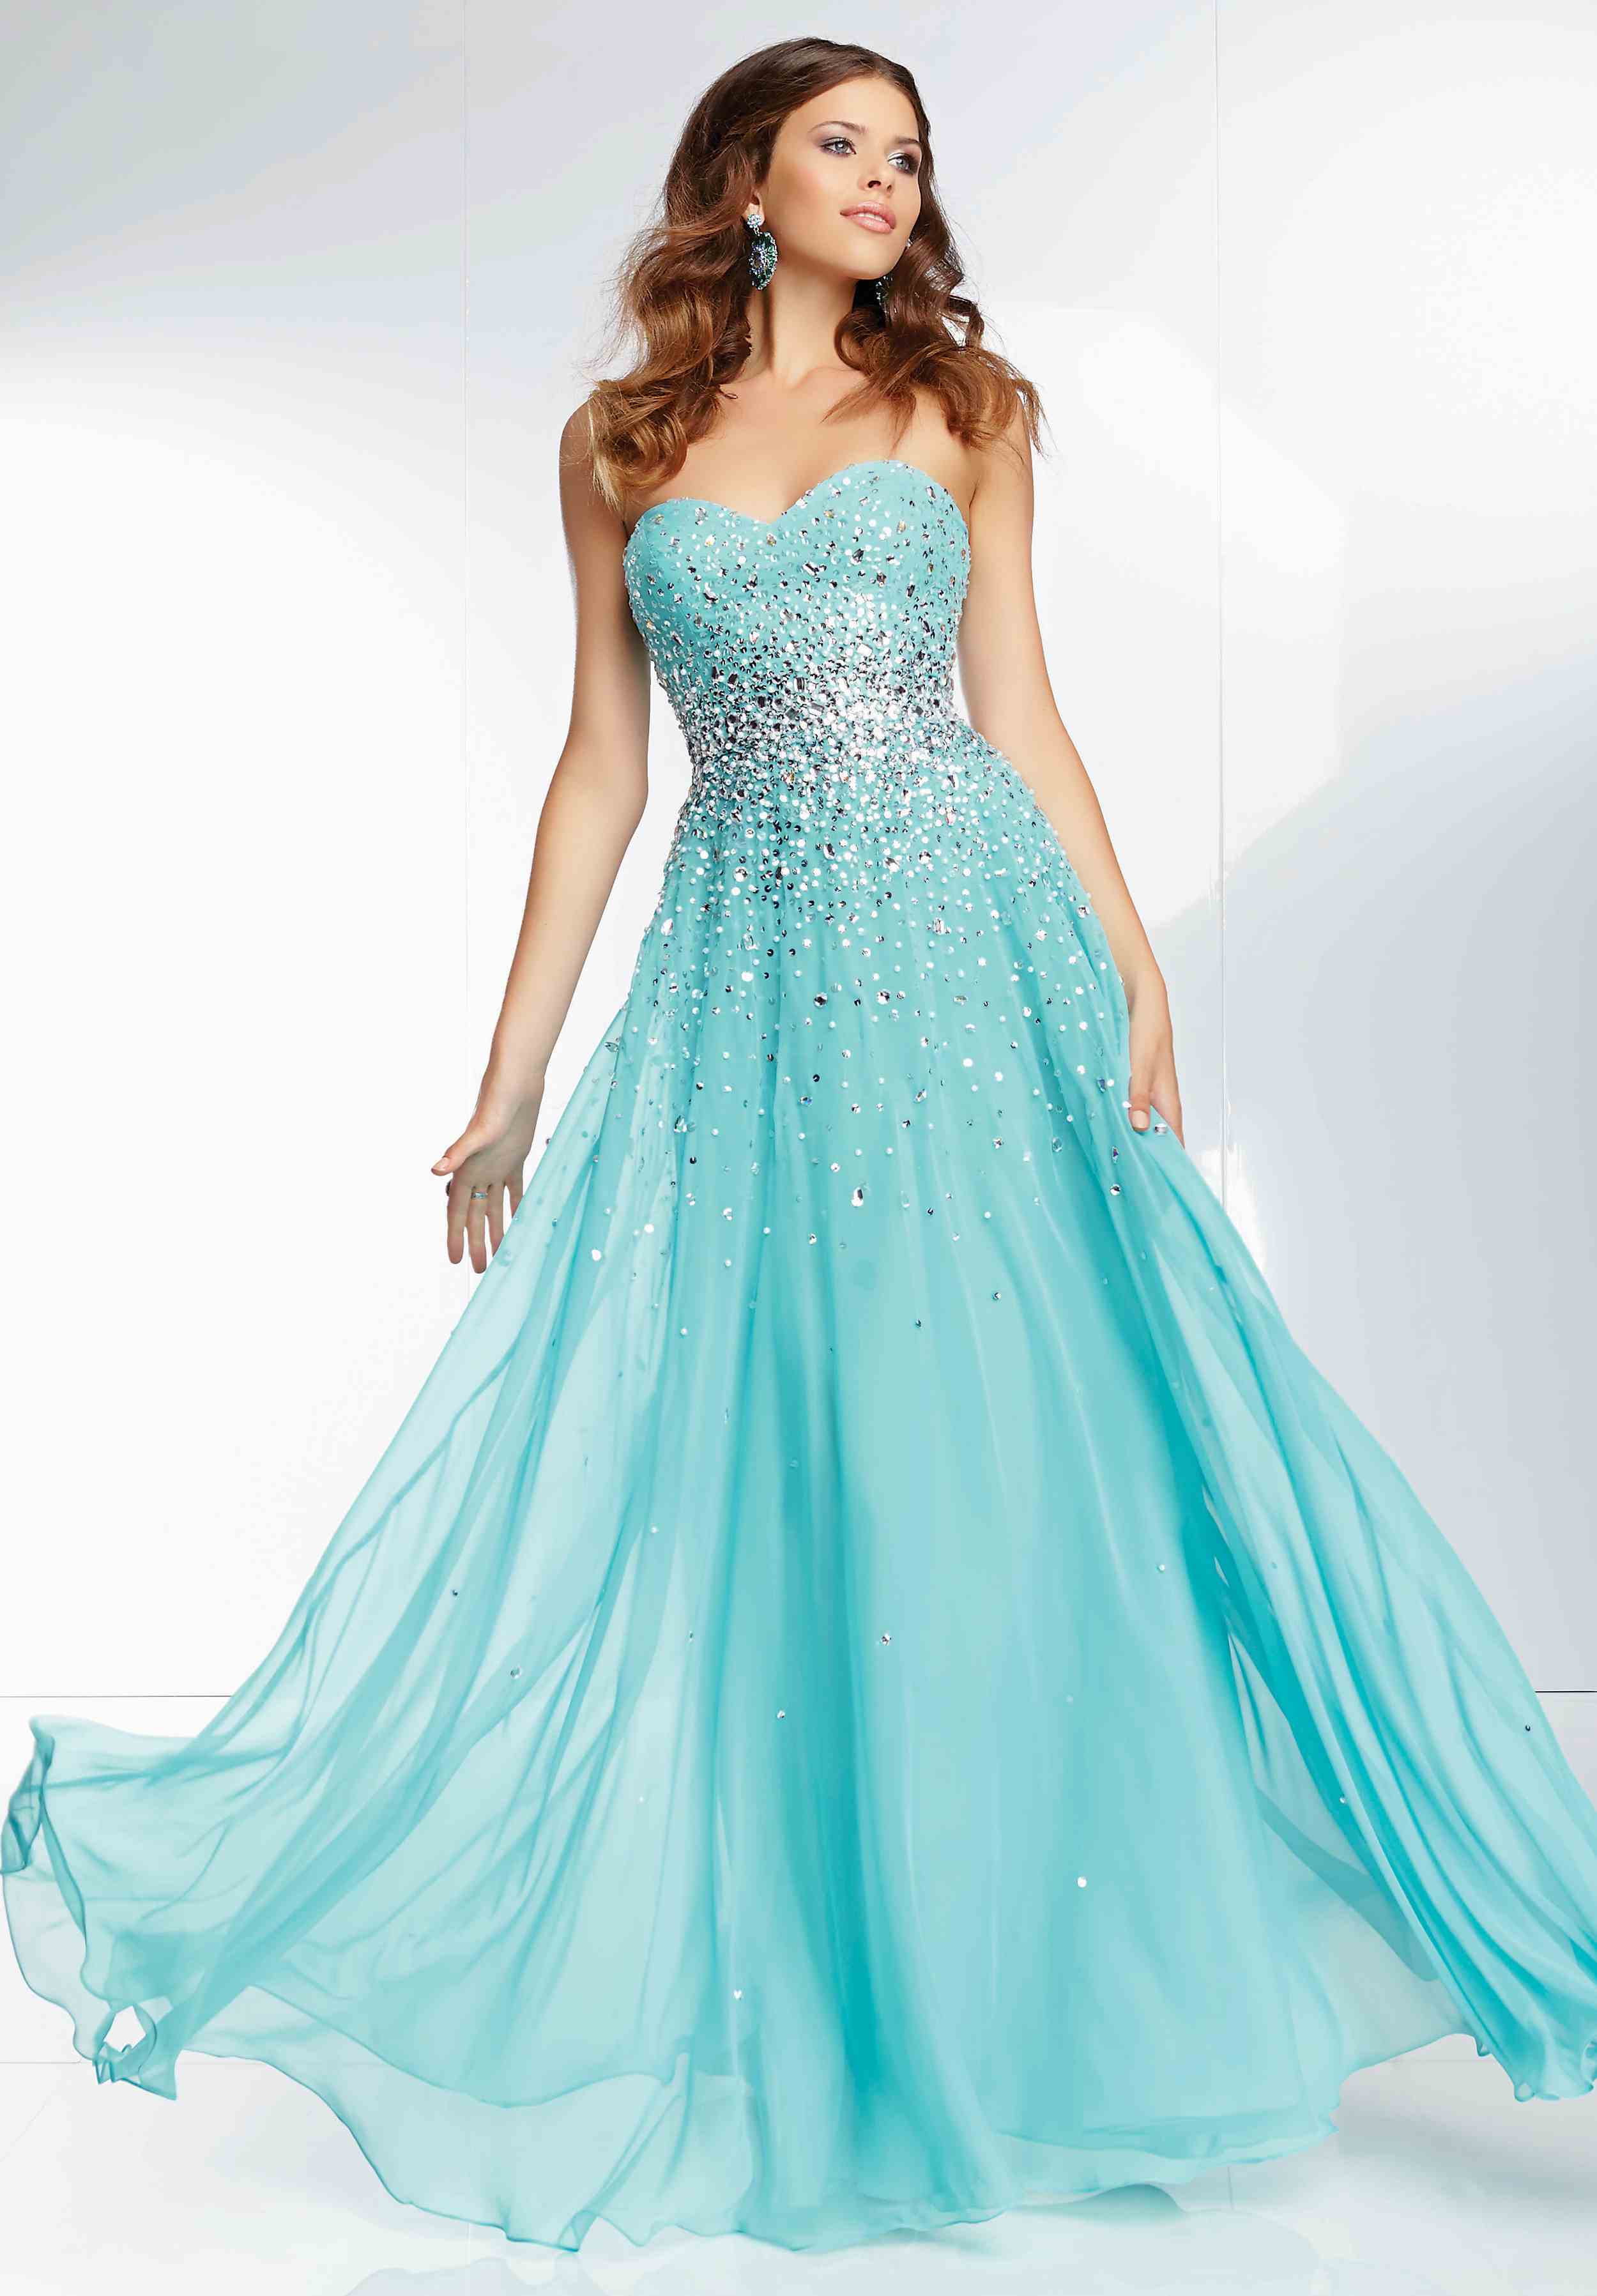 Mori Lee Prom Dresses - Gown And Dress Gallery